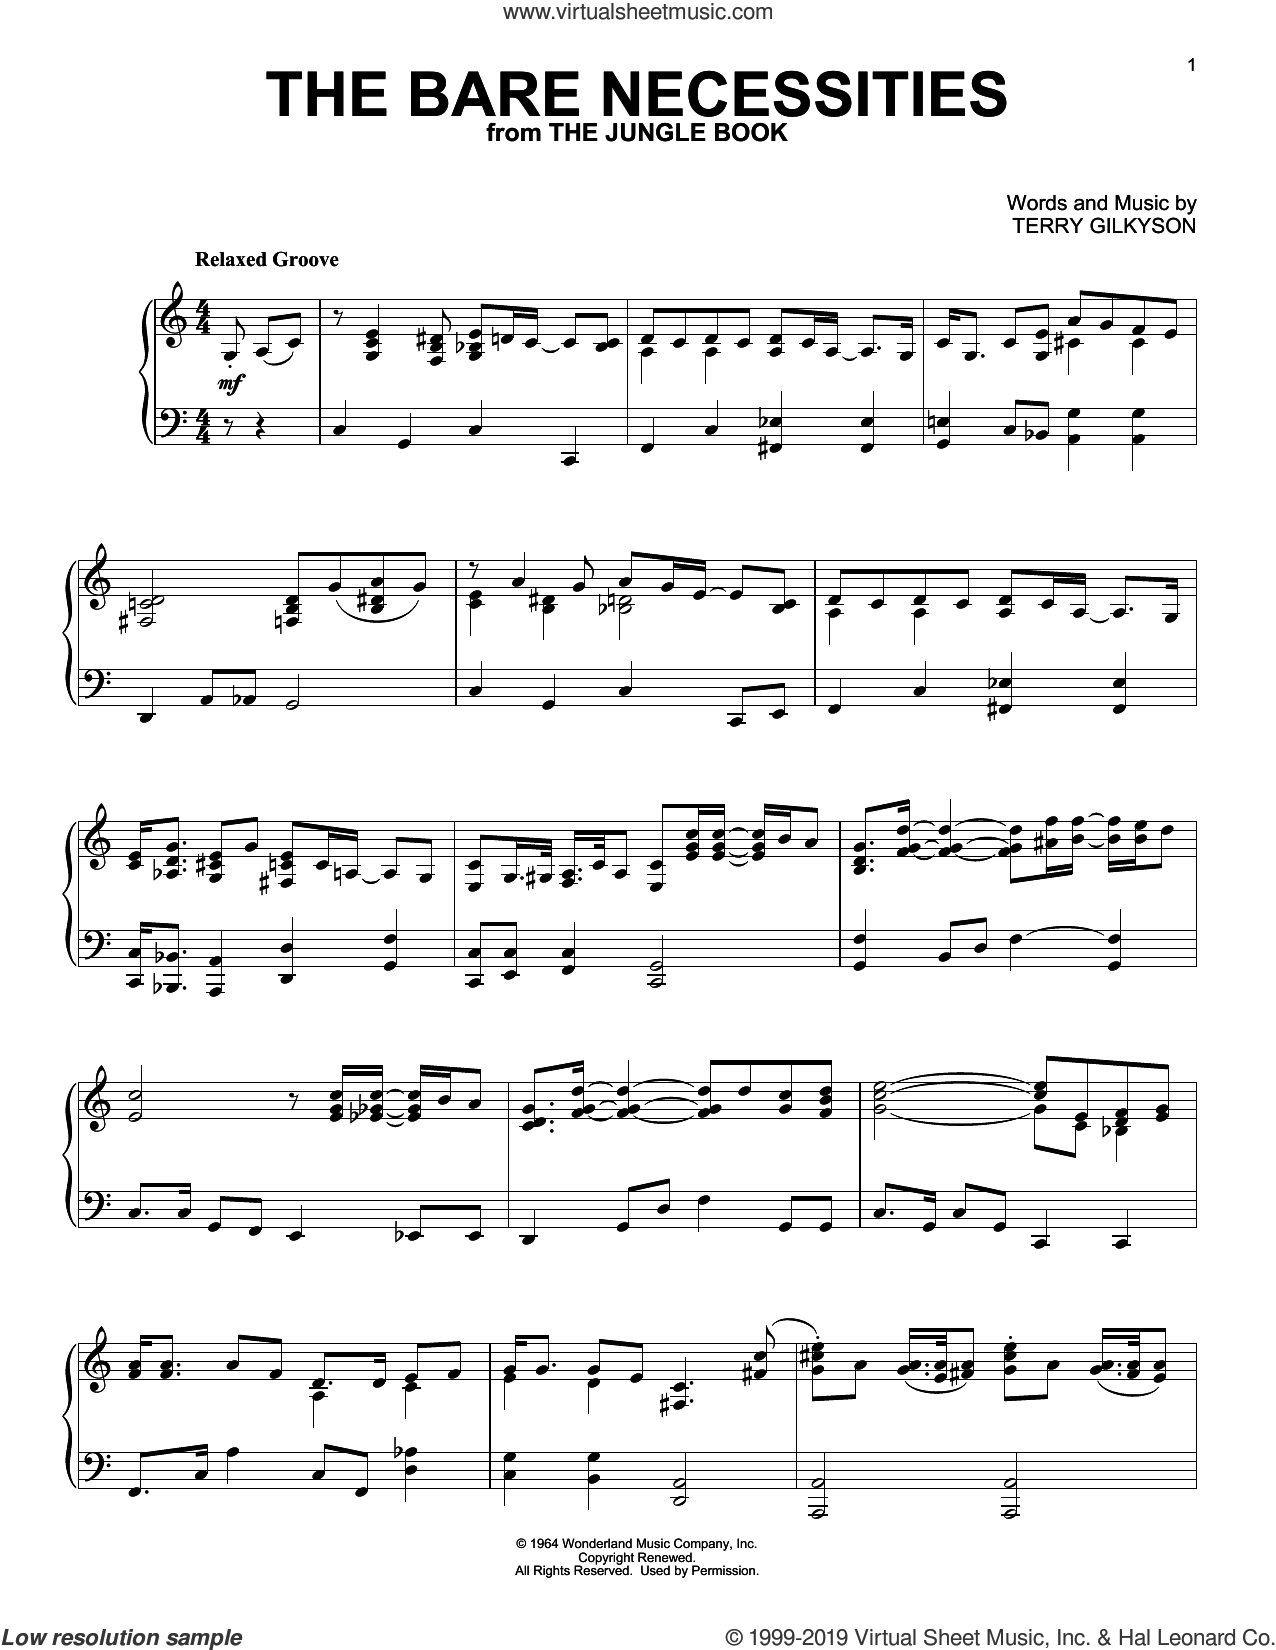 The Bare Necessities (from The Jungle Book) sheet music (intermediate) for  piano solo